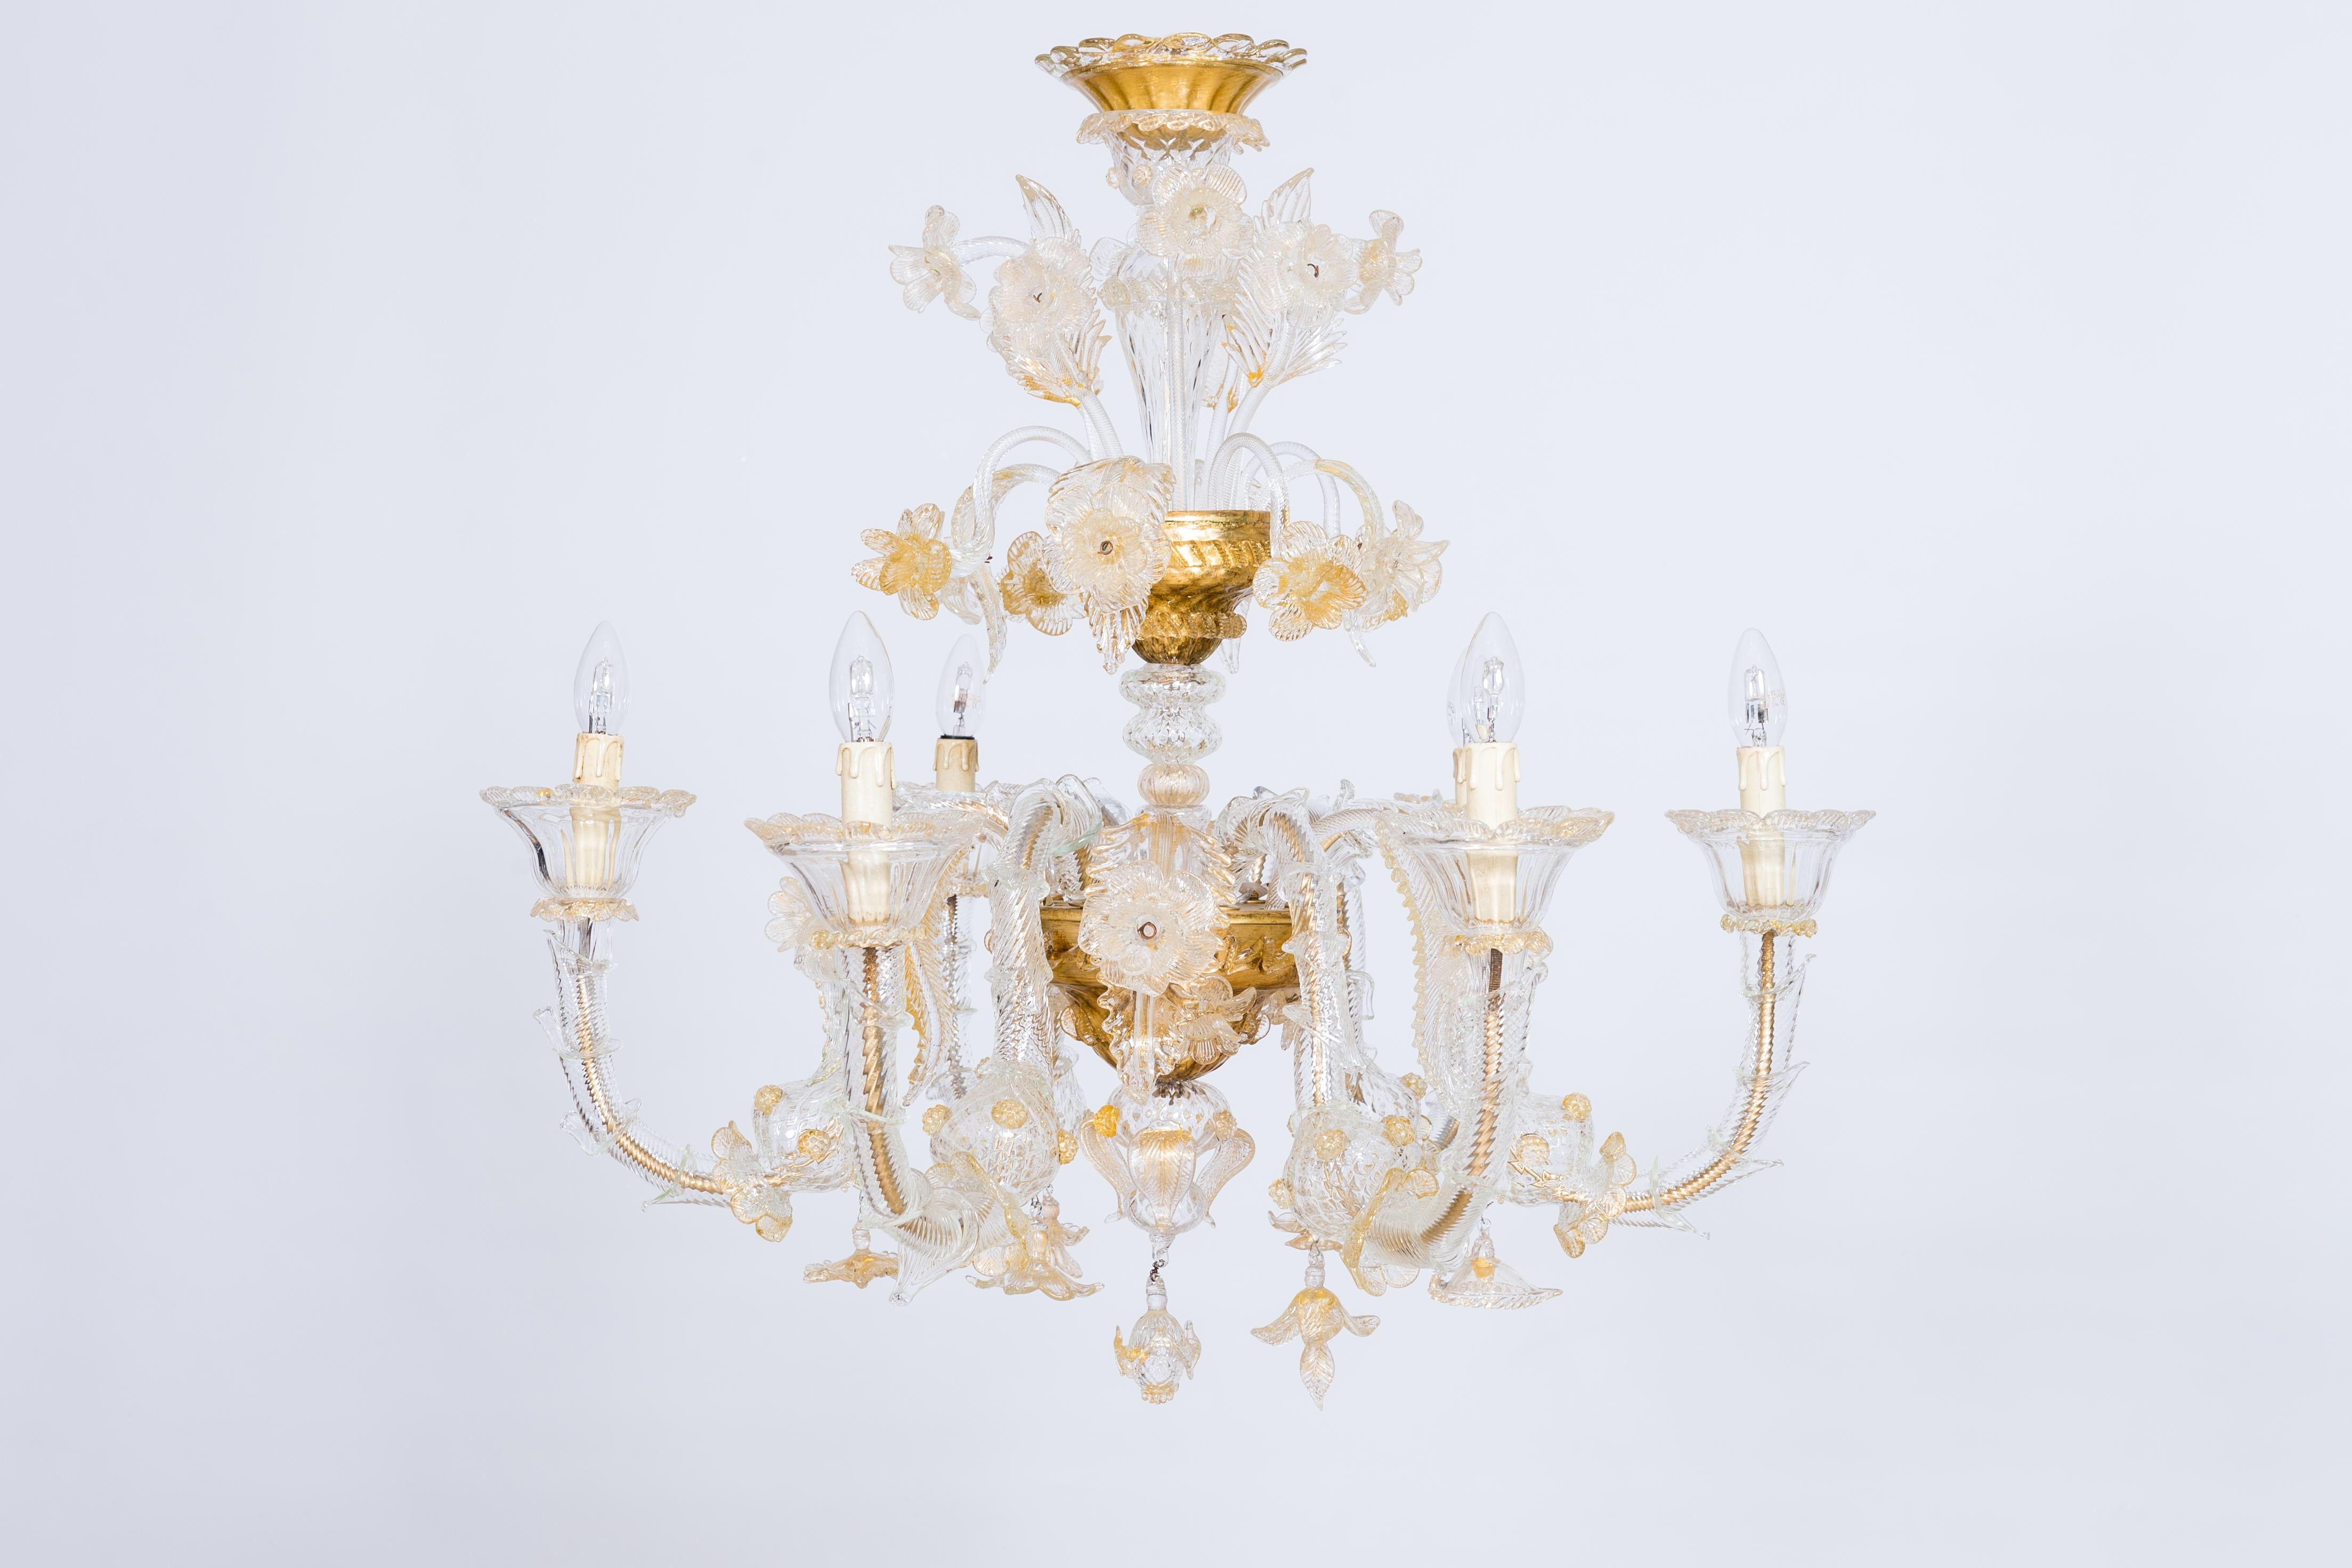 Rezzonico Chandelier in Gold Murano Glass Giovanni Dalla Fina 1980s Italy.
This breathtaking Rezzonico chandelier, crafted in the 1980s, embodies the unparalleled artistry and craftsmanship of Murano glassmaking. Its intricate design features a